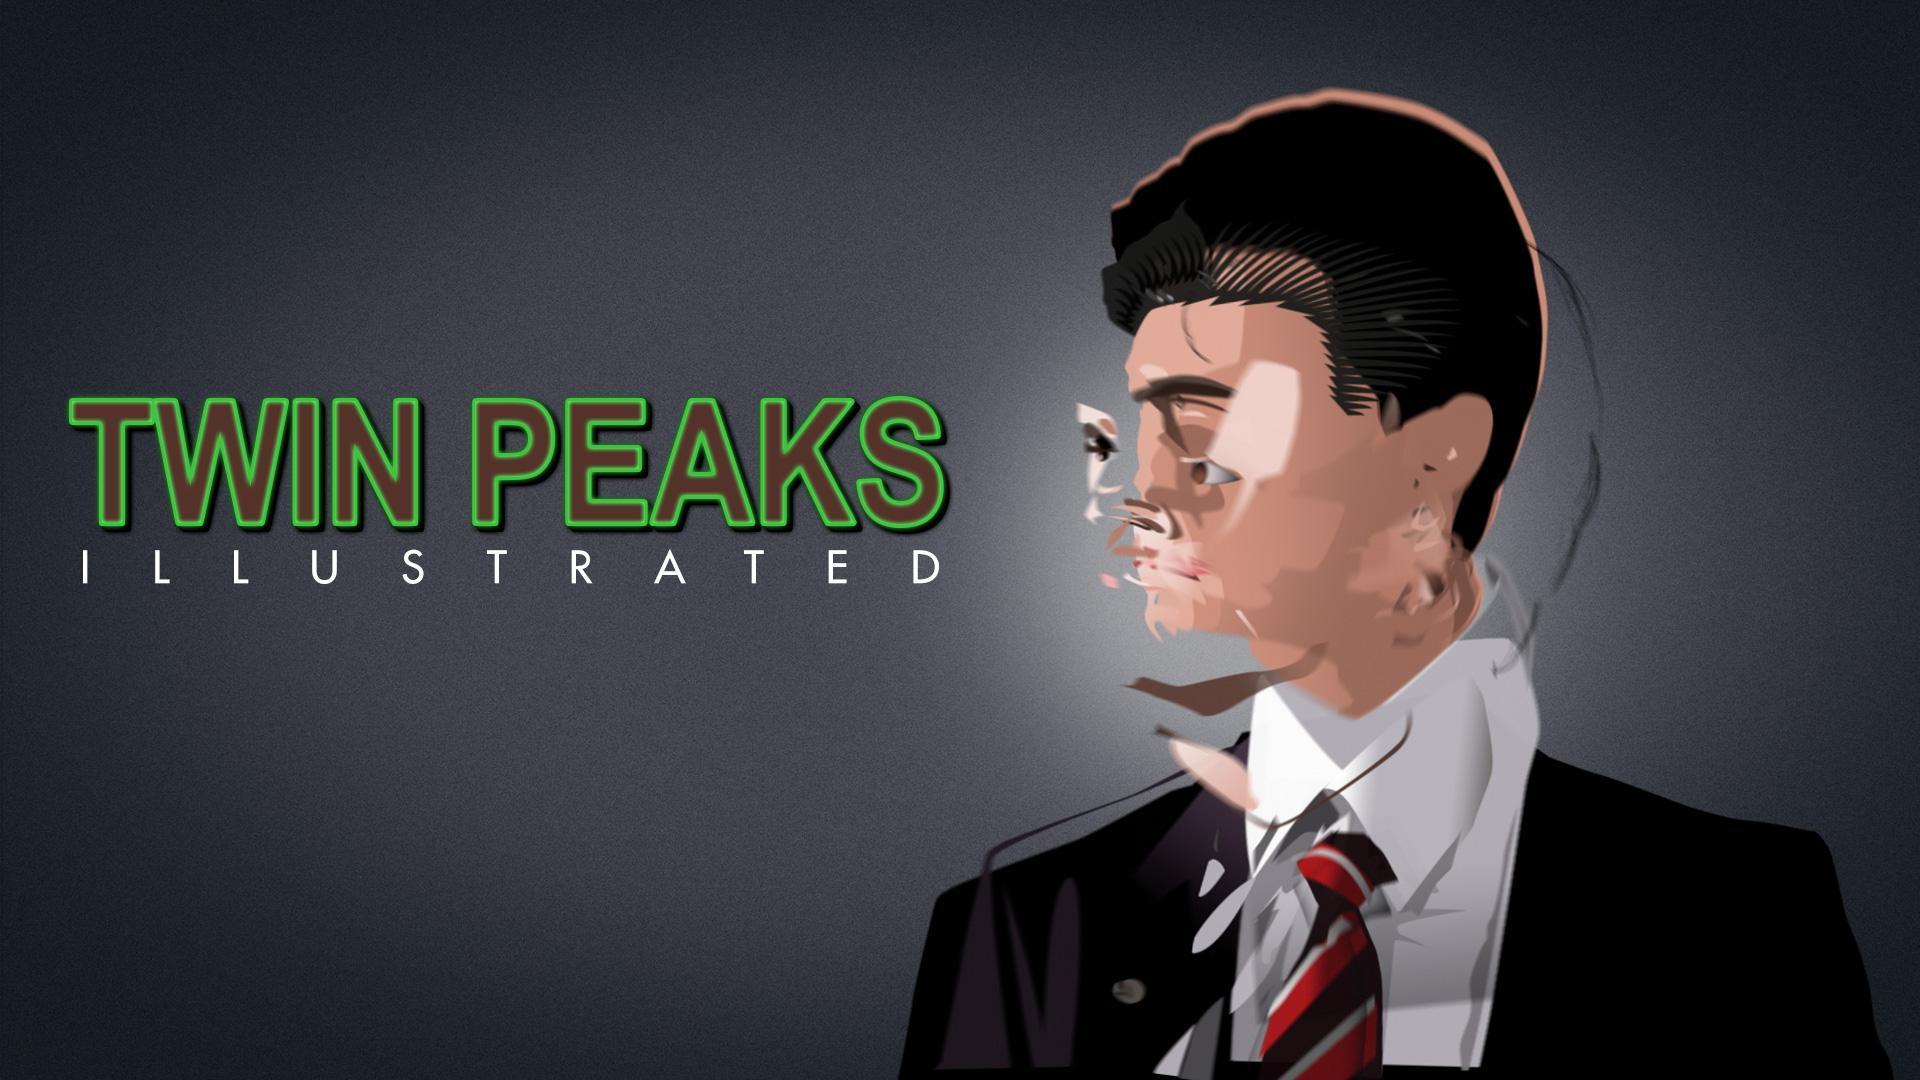 Twin Peaks Illustrated (S) - Posters